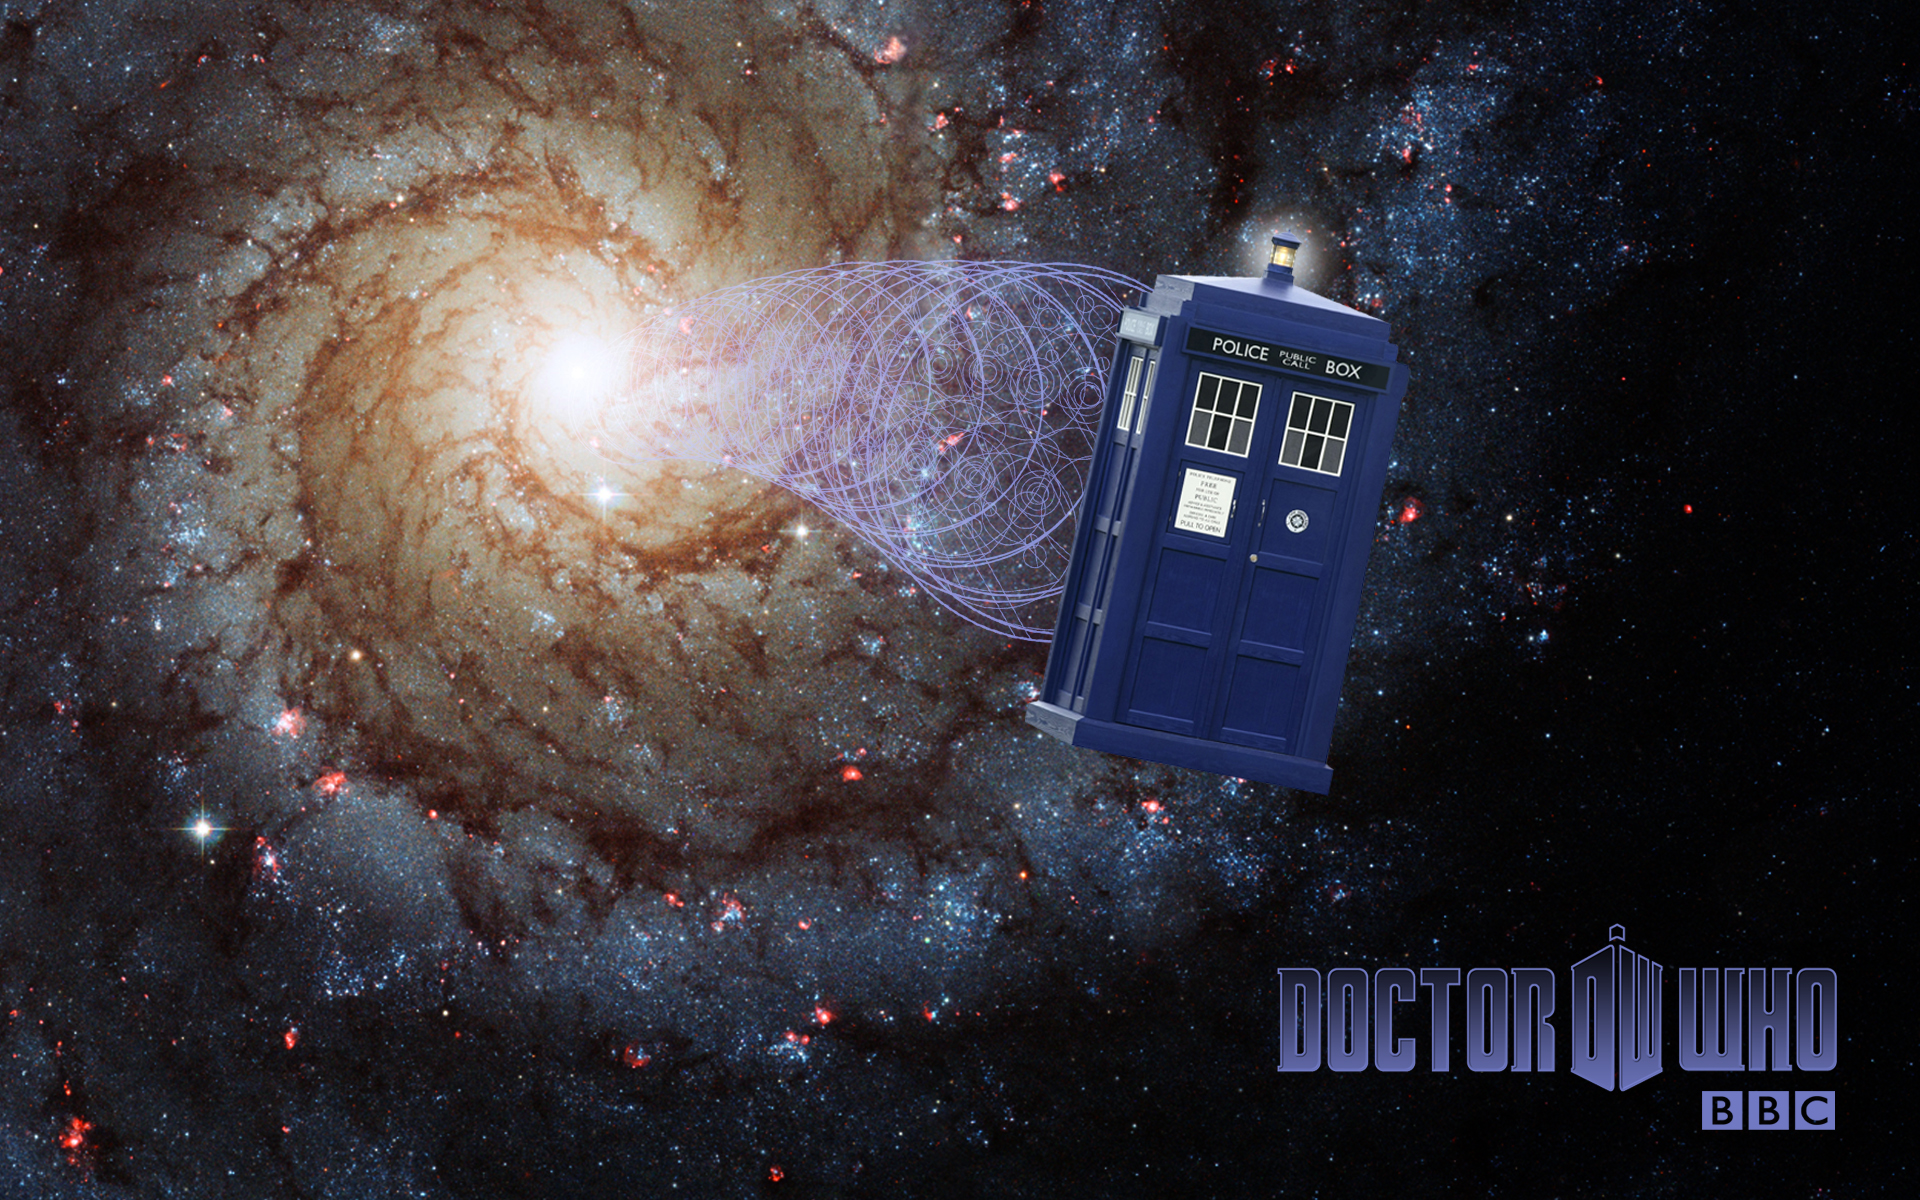 Download Doctor Who Wallpapers Tardis pictures in high definition or 1920x1200